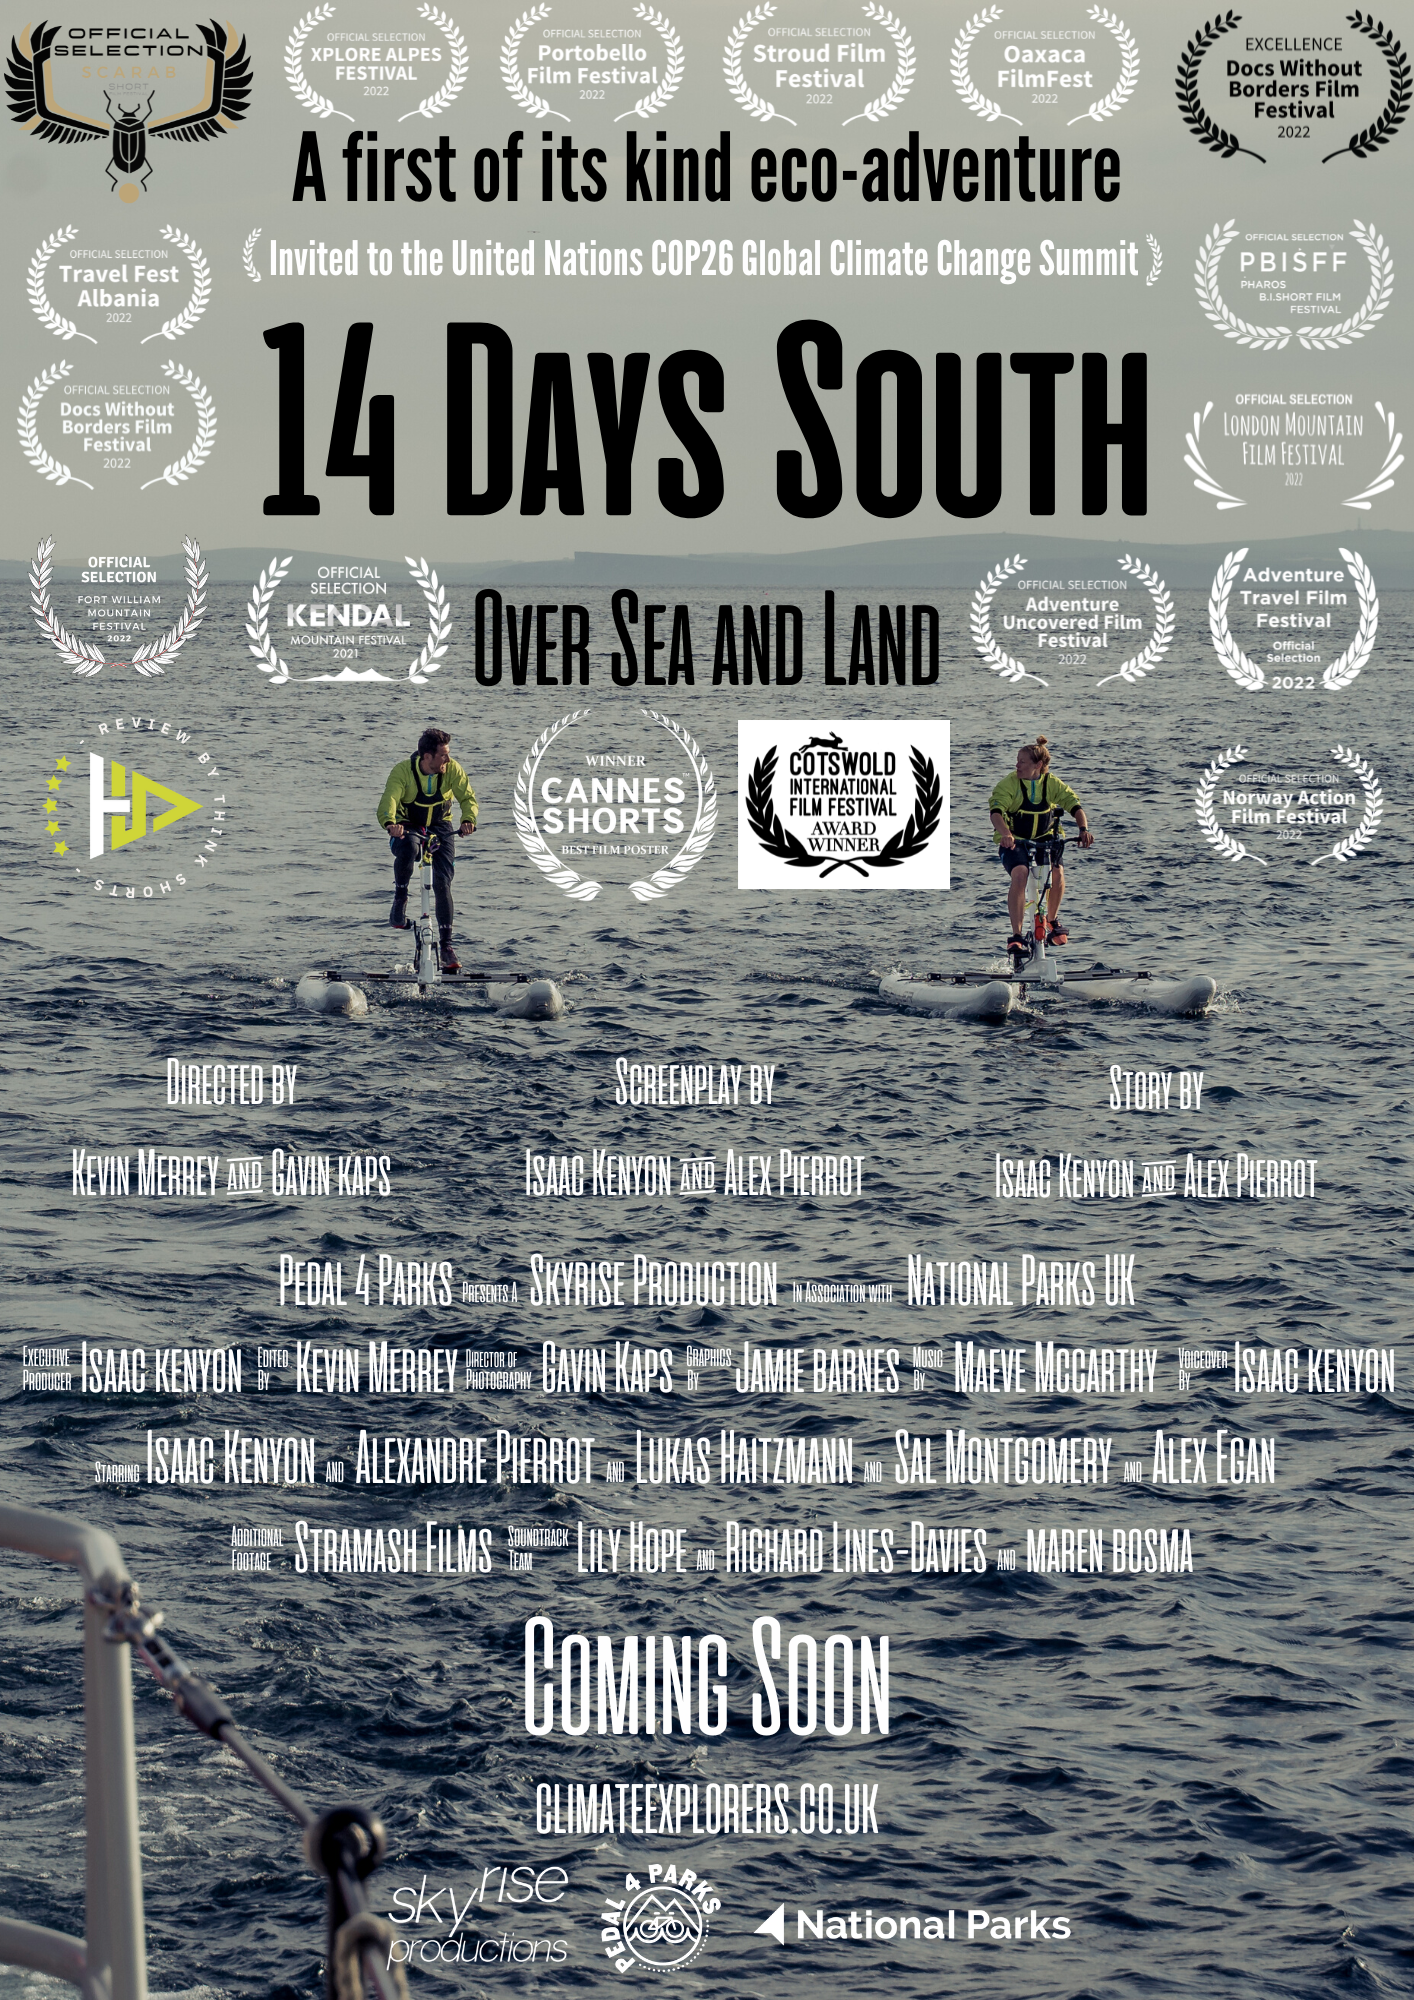 14 Days South - Over Sea and Land Documentary